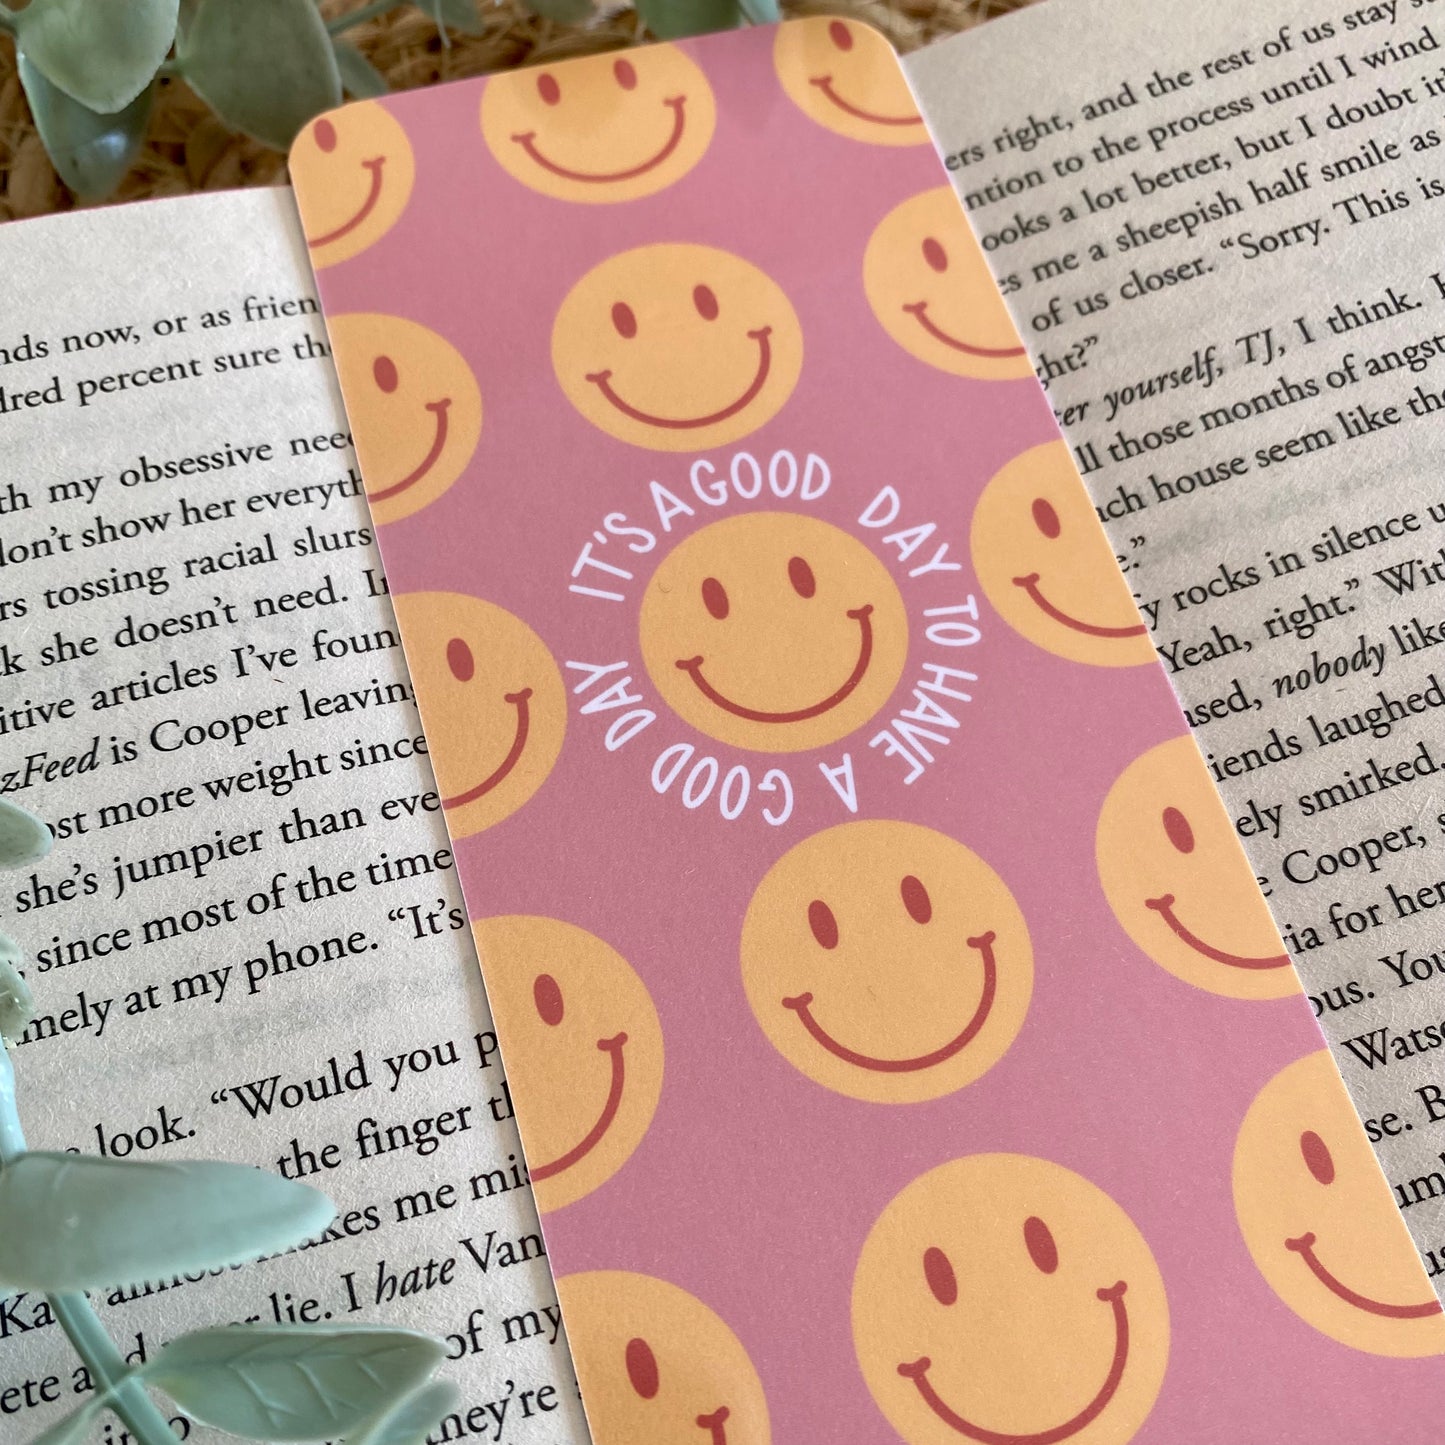 It's a good day | Bookmark